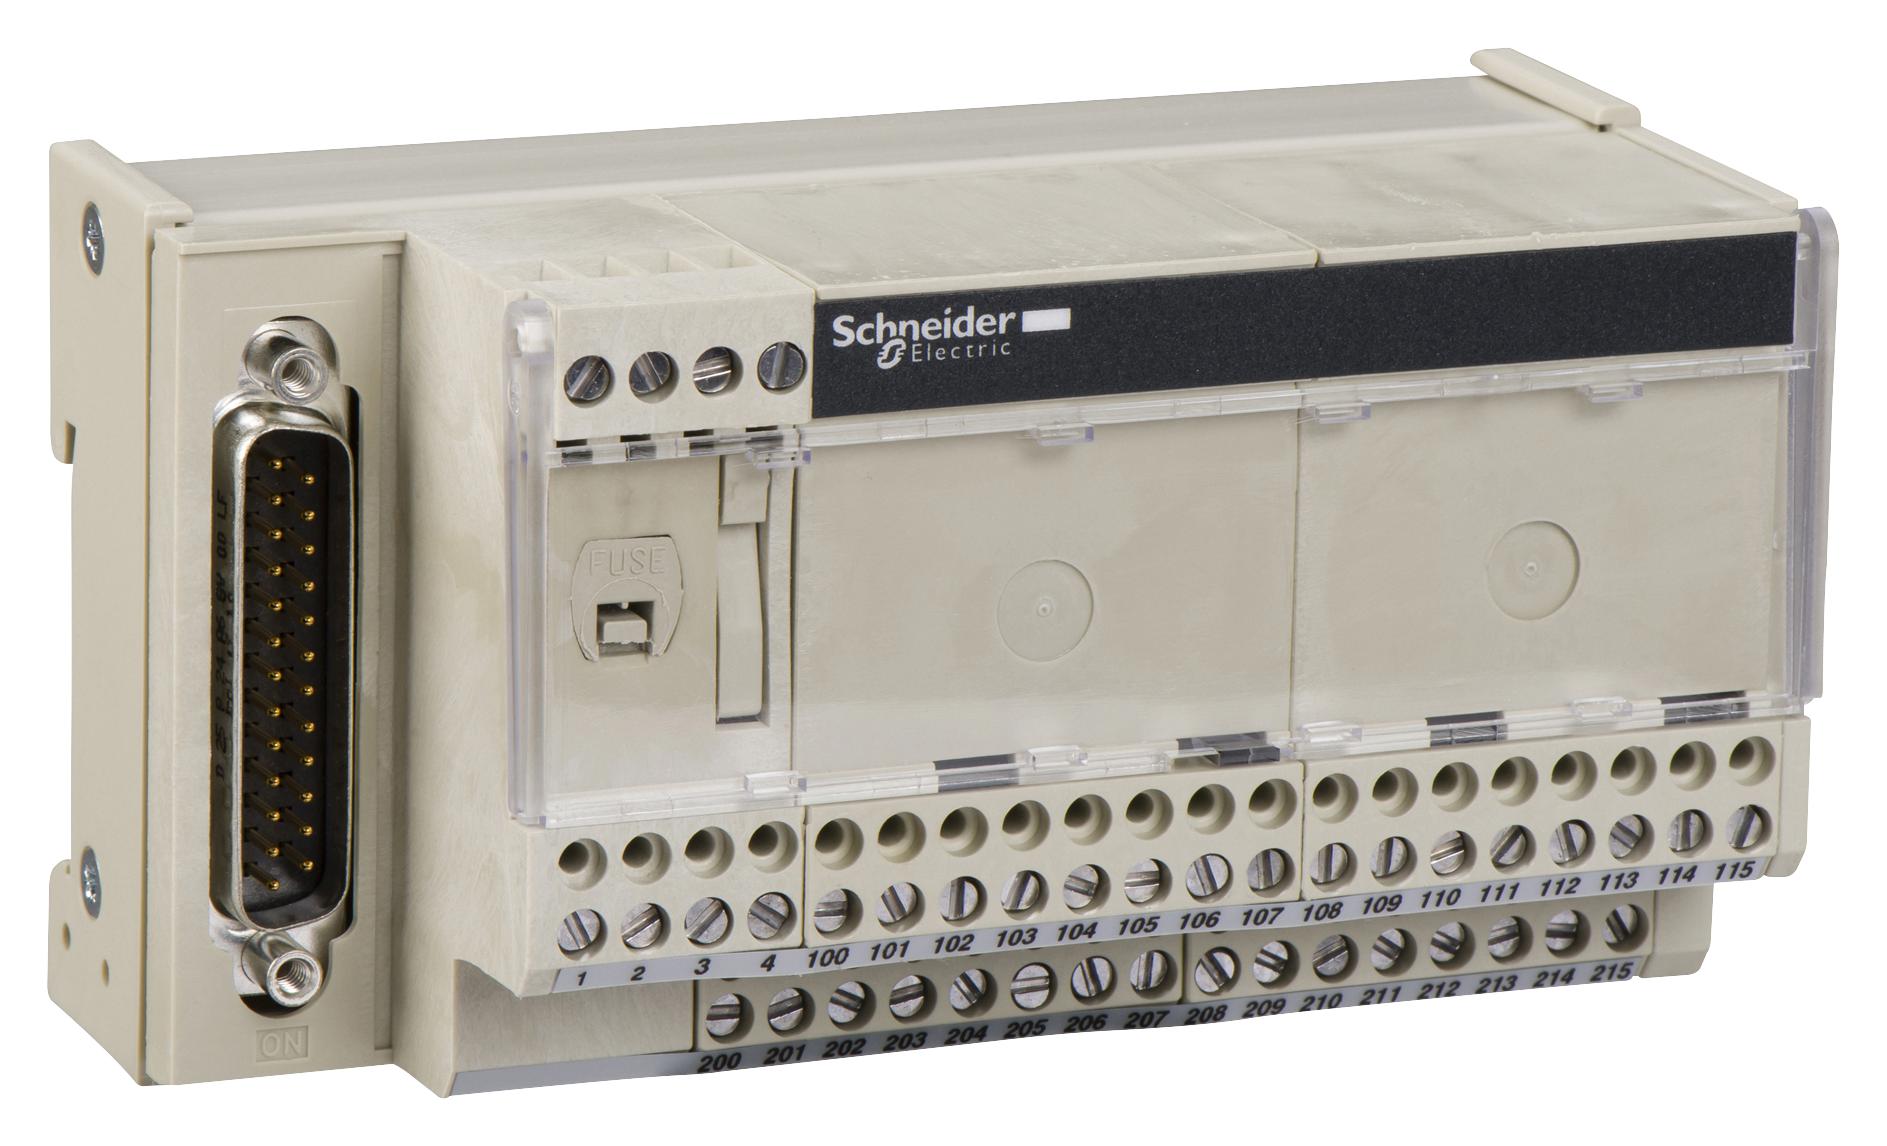 ABE7CPA03 CONNECTION SUB BASE, 8CH SCHNEIDER ELECTRIC